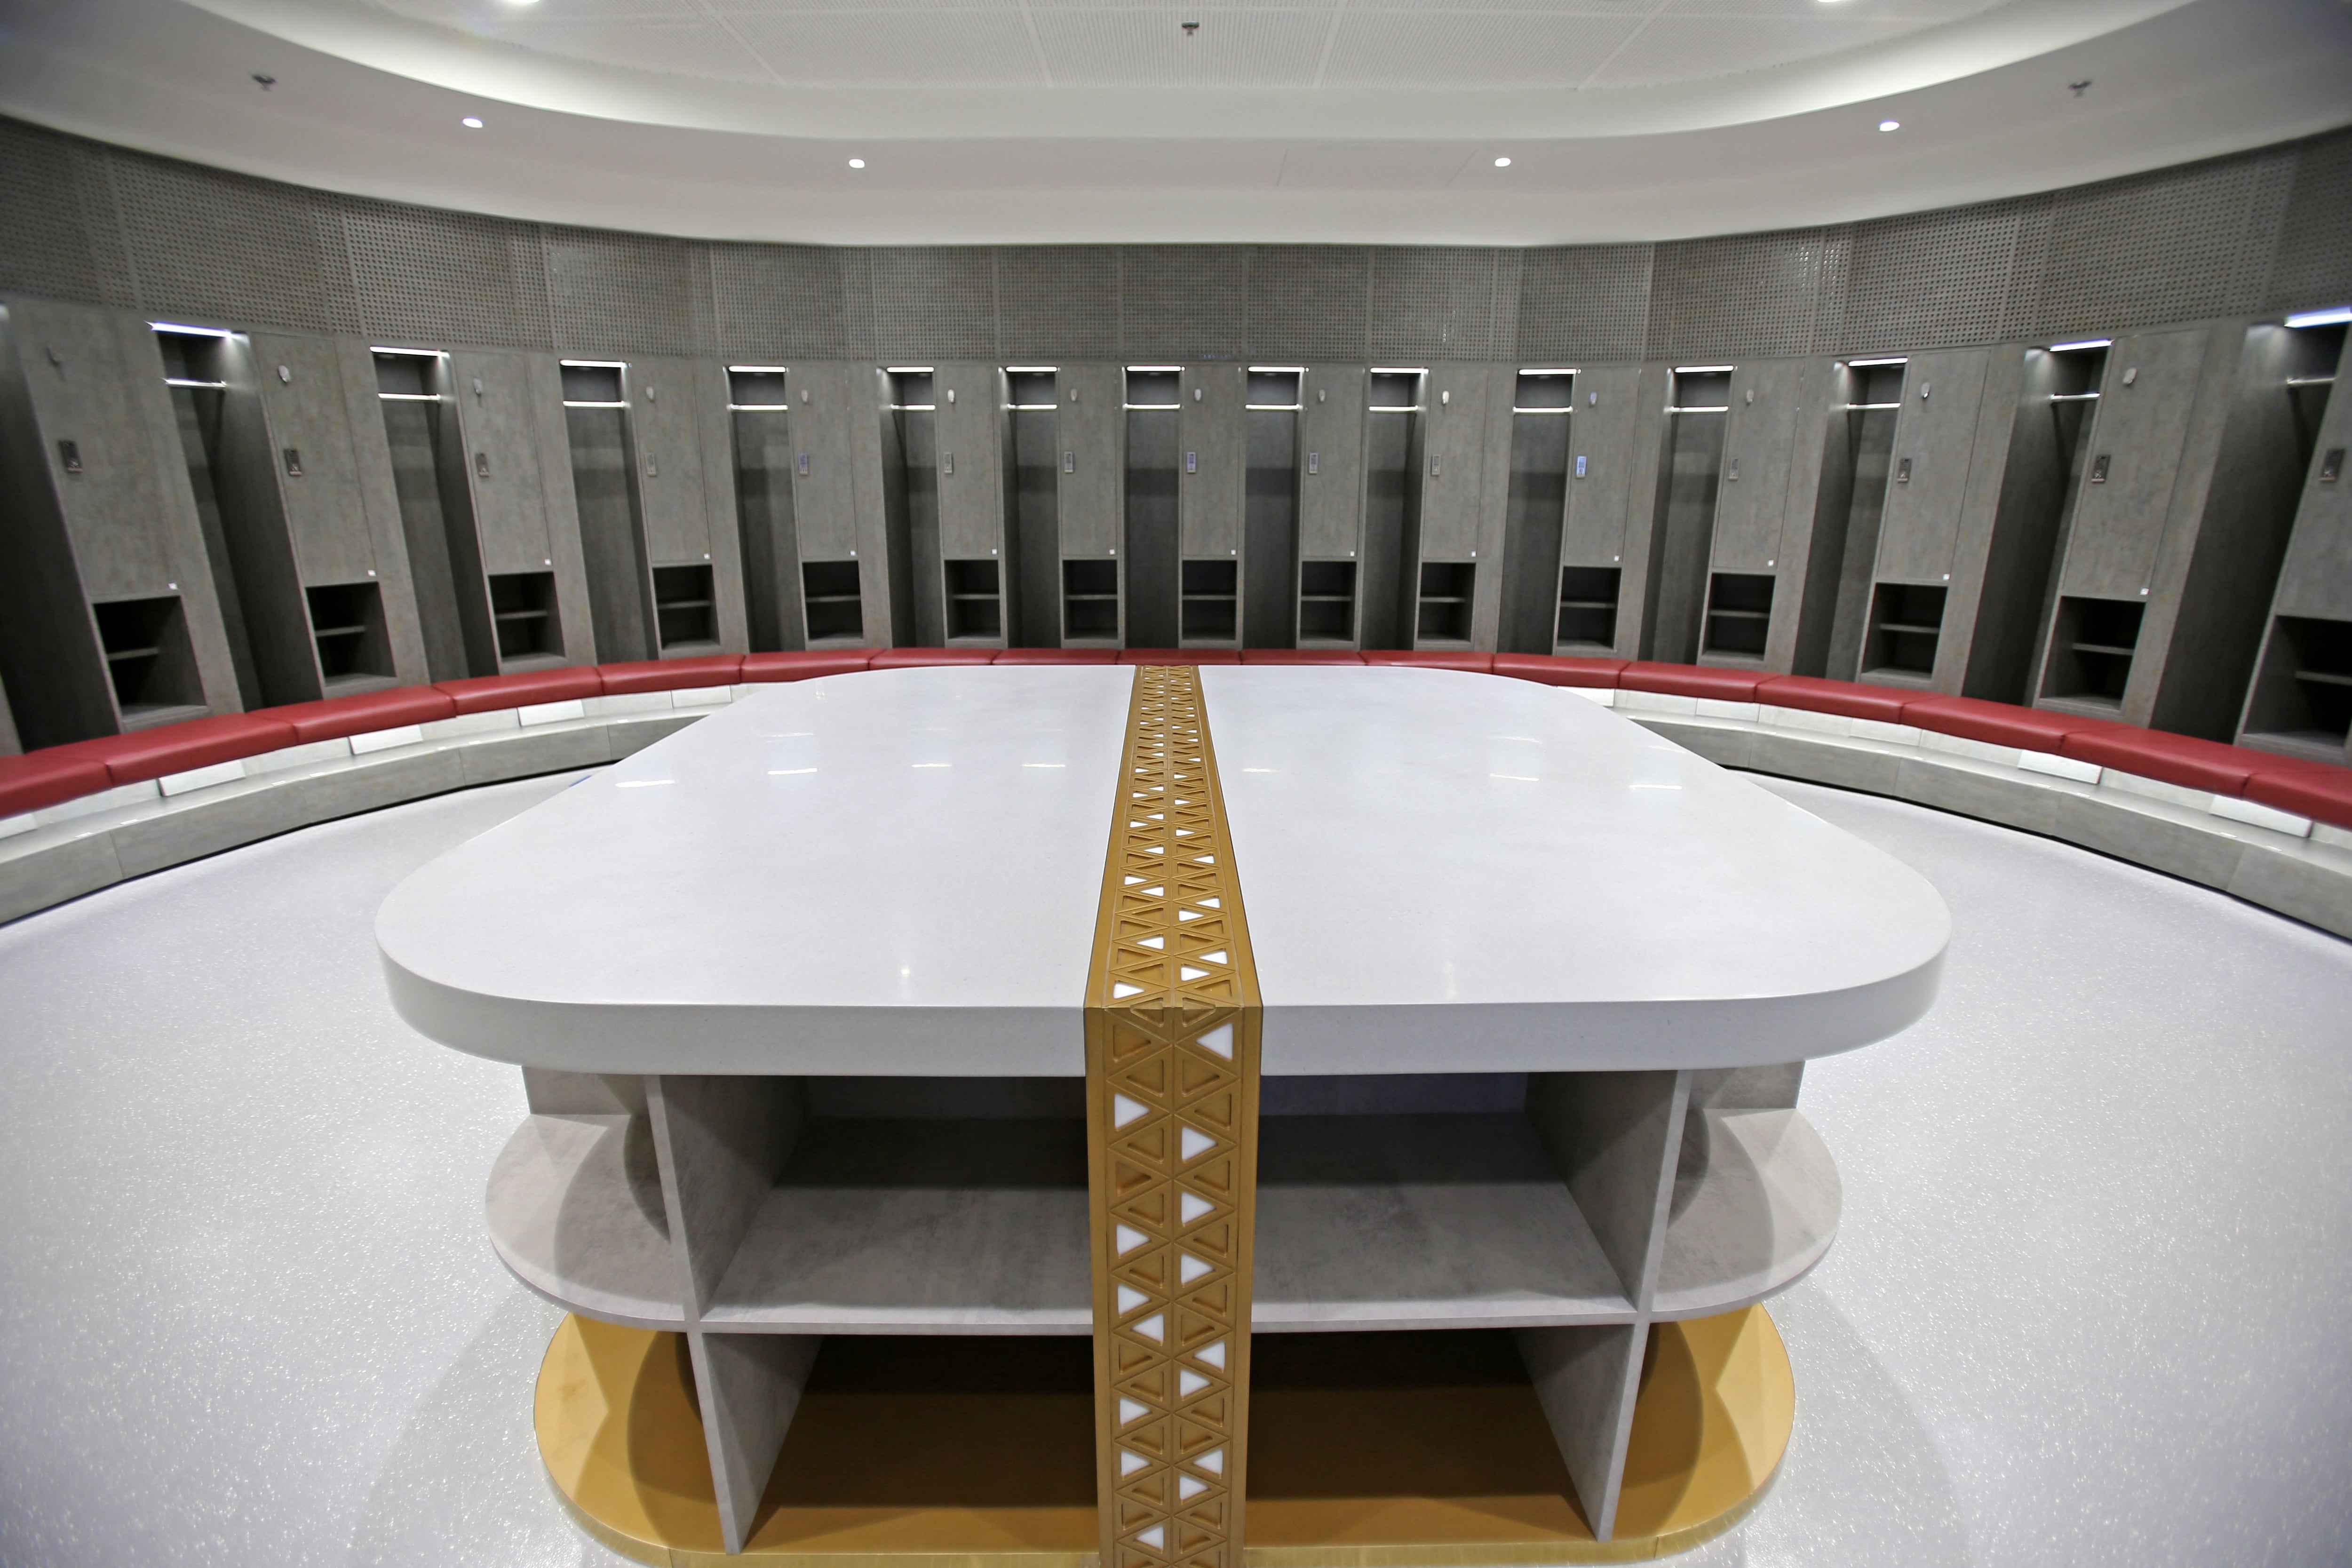 The changing rooms of the Lusail stadium for the Qatar 2022 World Cup.